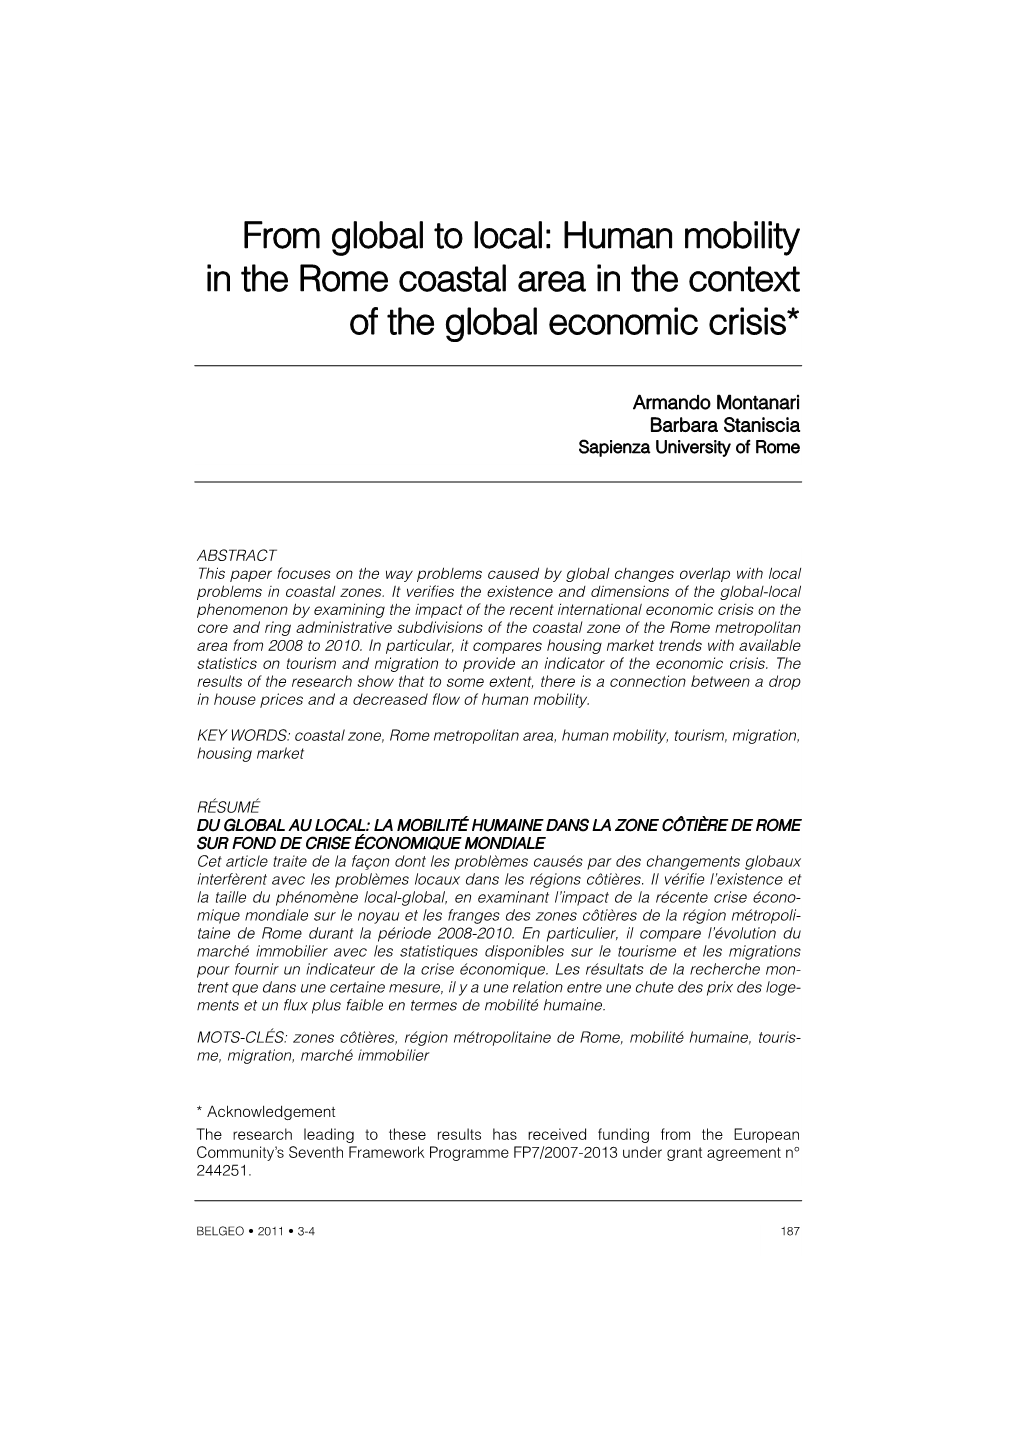 From Global to Local: Human Mobility in the Rome Coastal Area in the Context of the Global Economic Crisis*